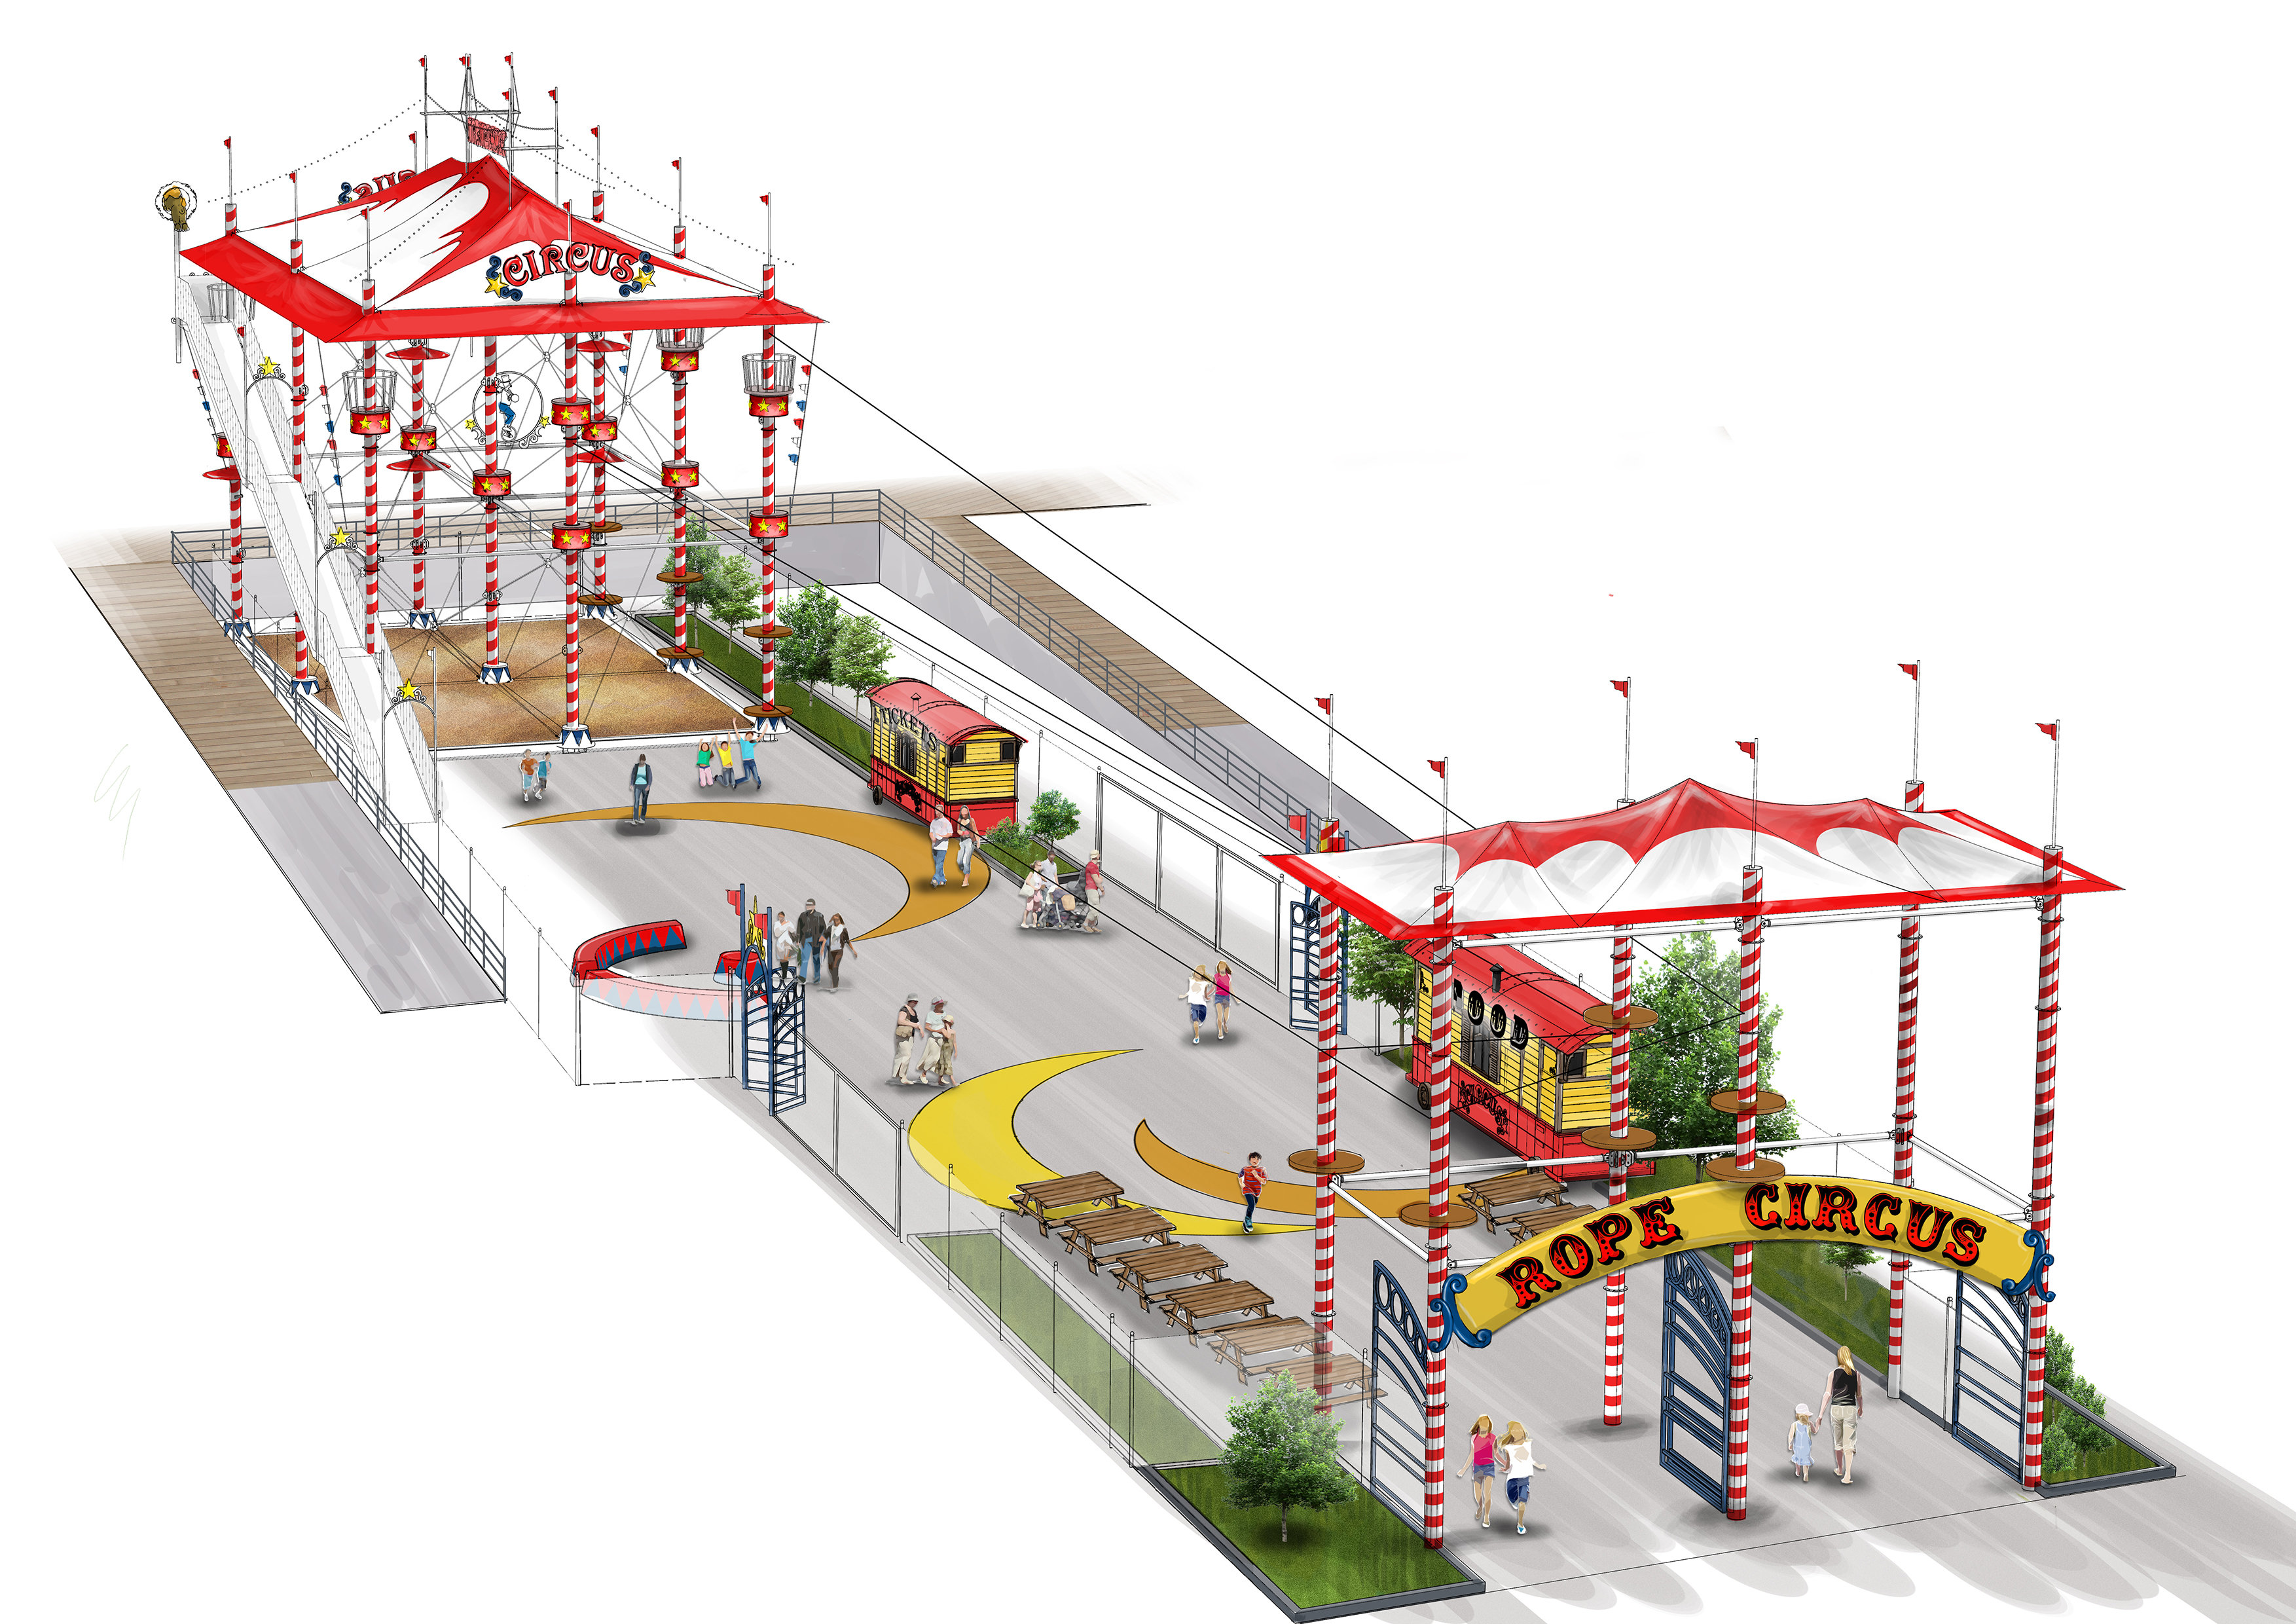 NYCEDC Announce Plans To Update Coney Island With New Rides & Adventure Park